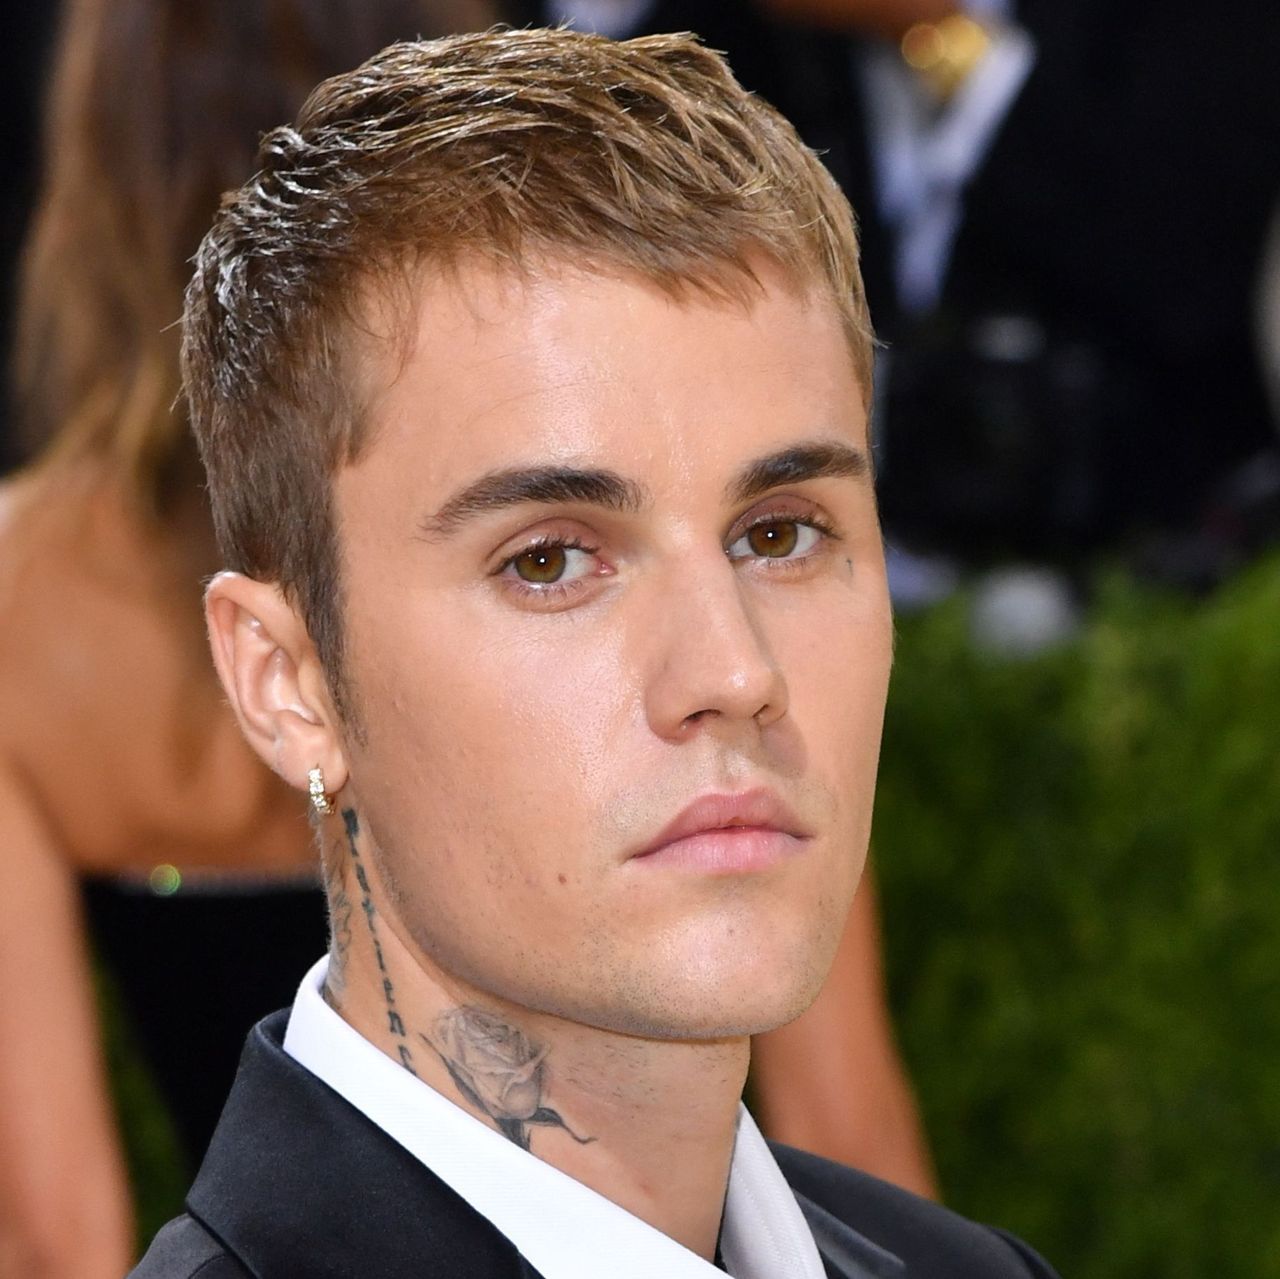 Despite being diagnosed with a rare neurological condition, Justin Bieber appears healthy.